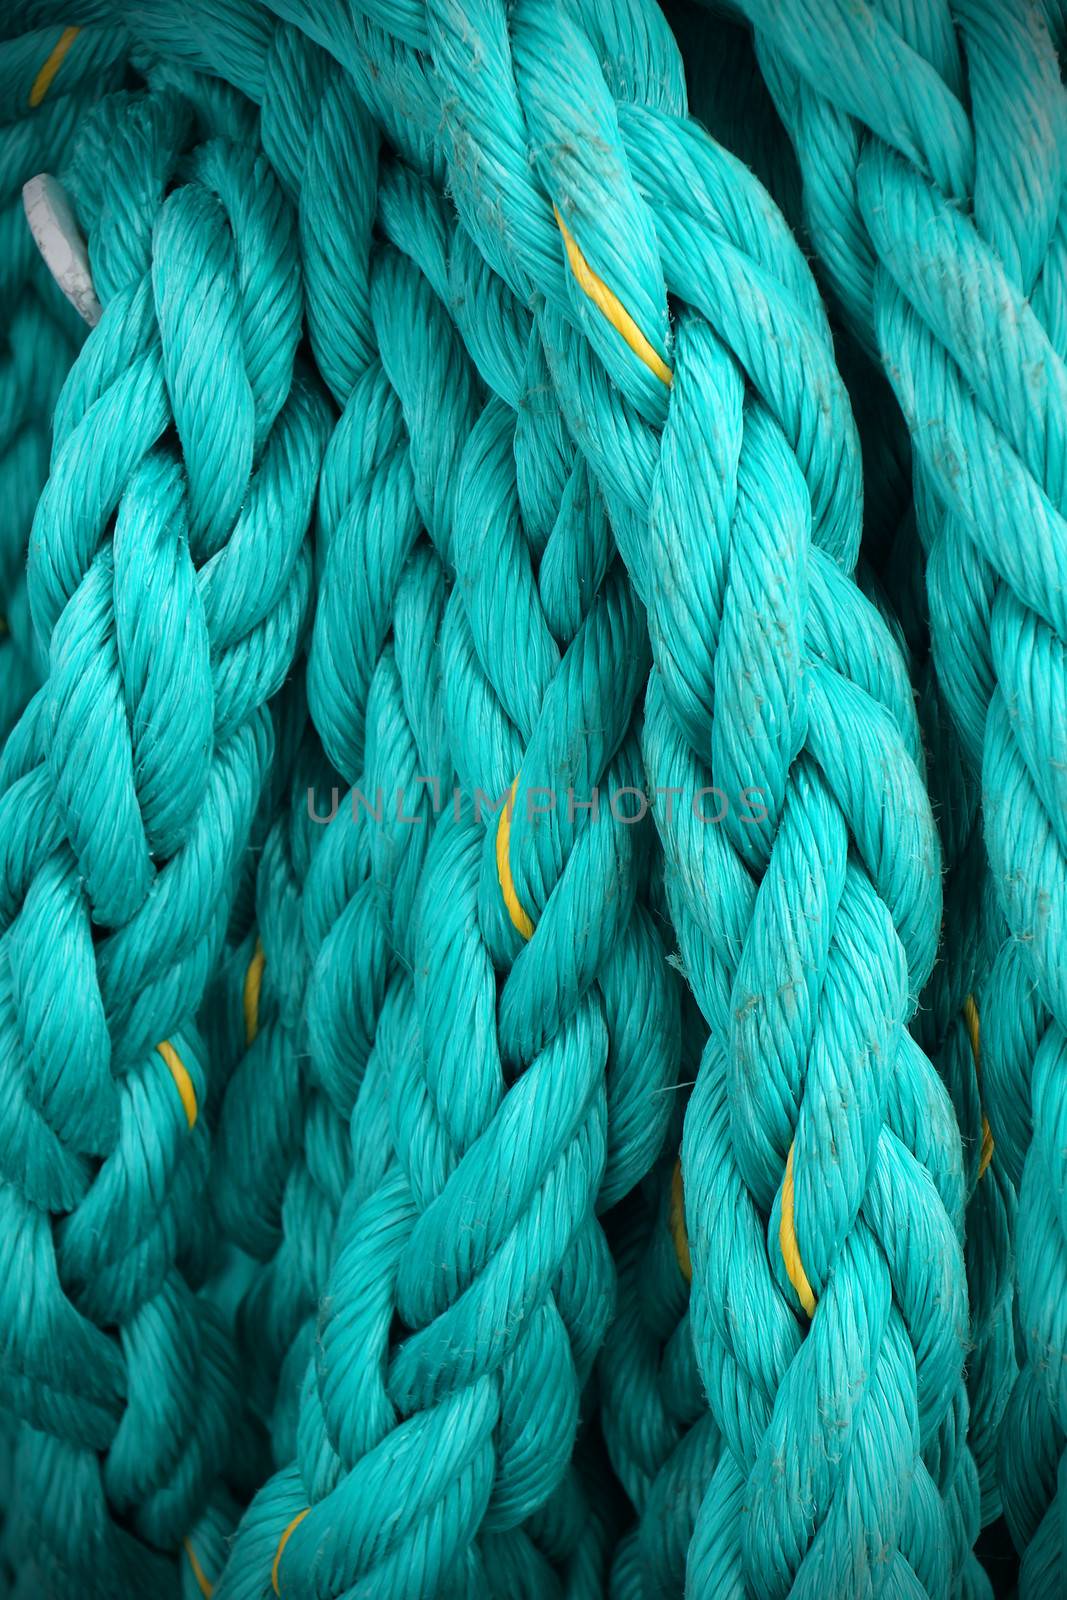 Large ship cable background by Mirage3